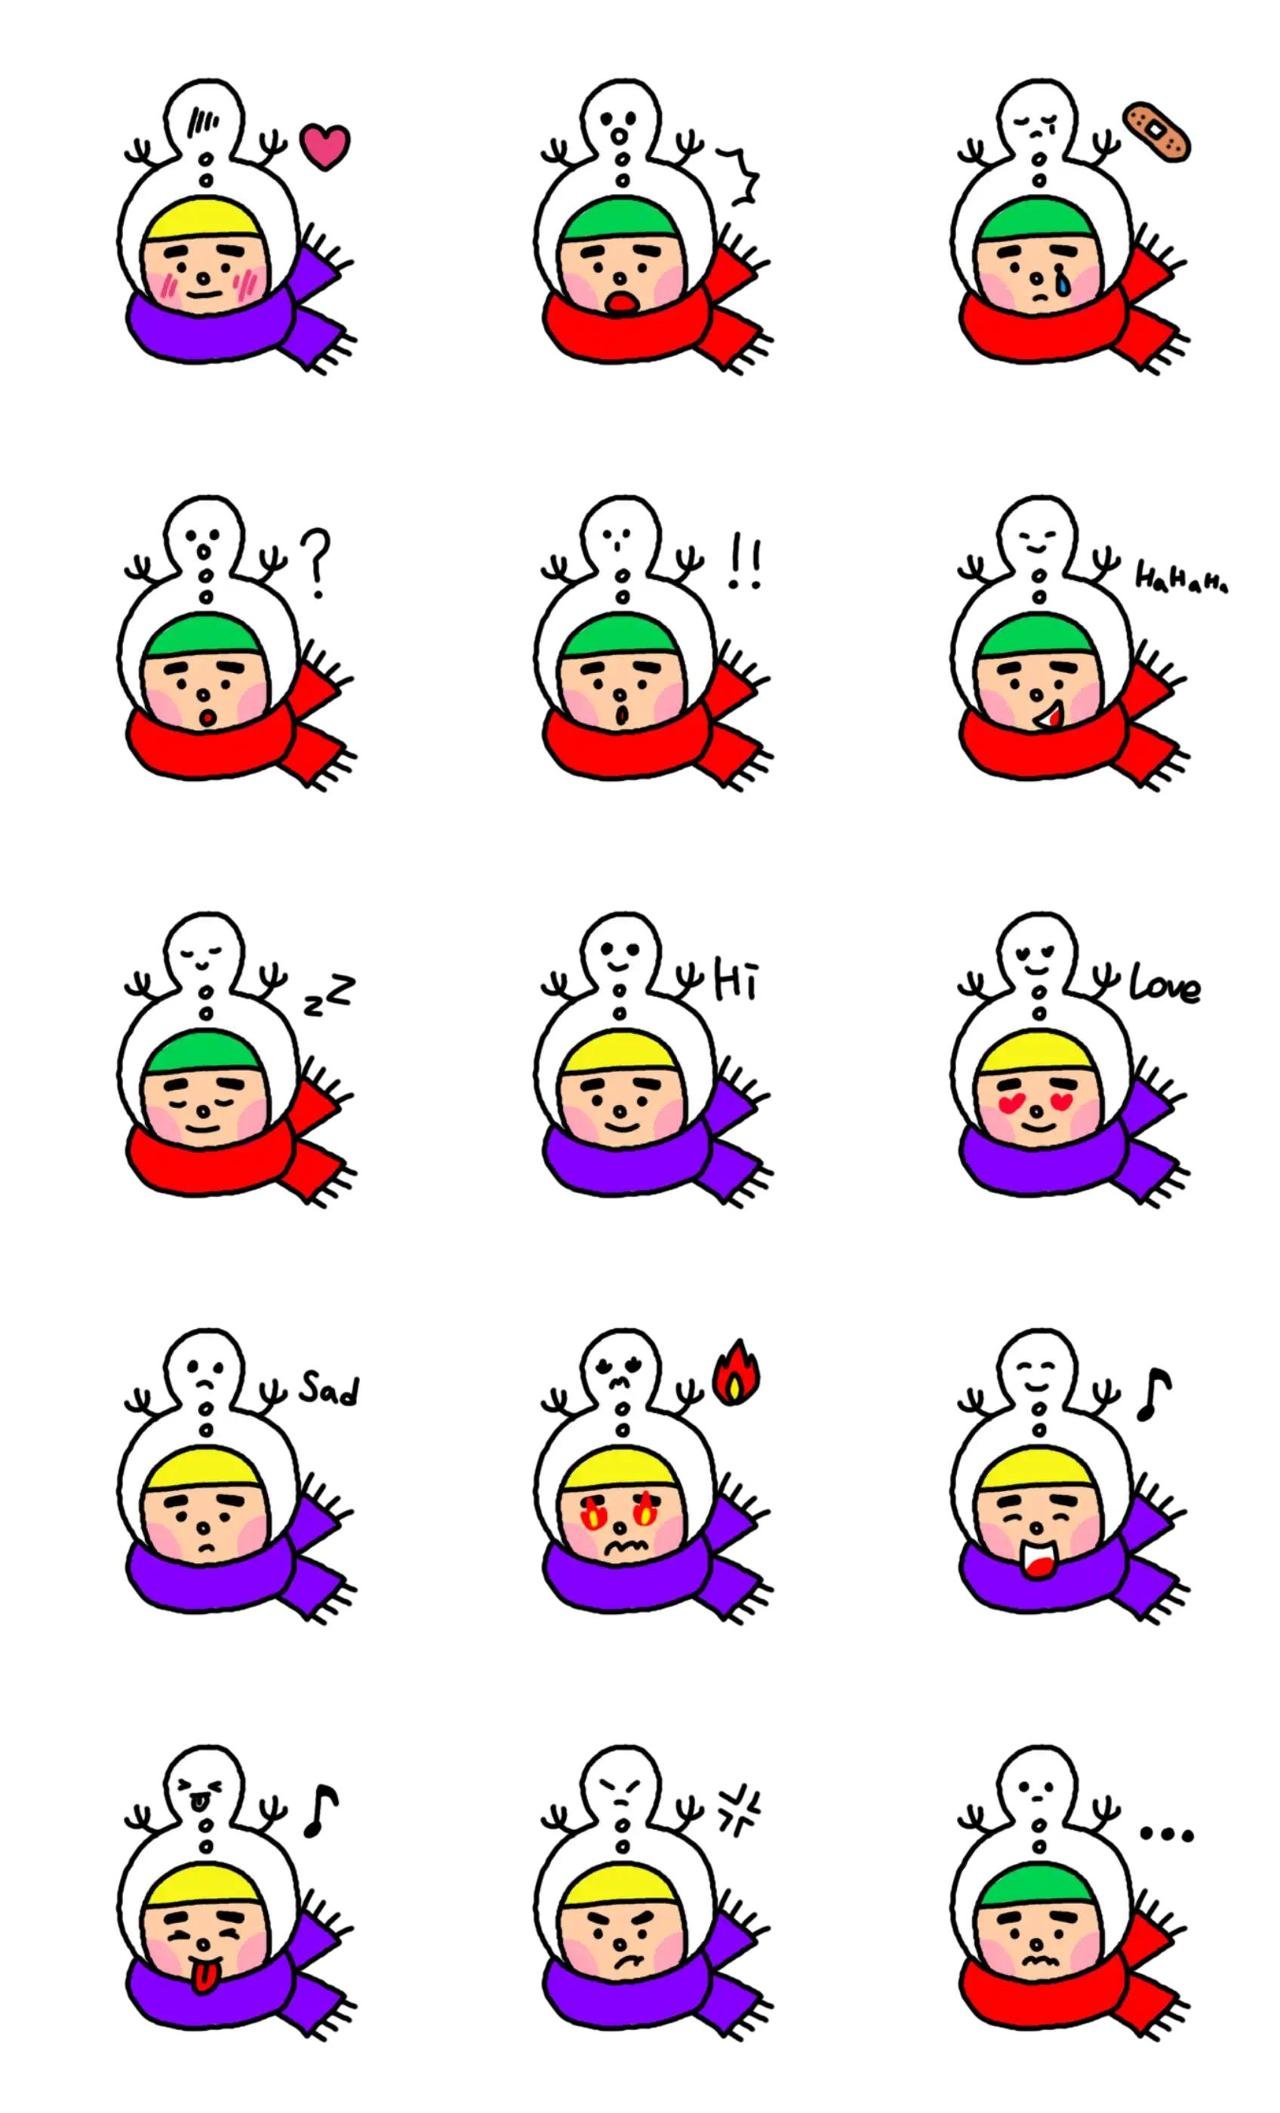 Snowman Boy People sticker pack for Whatsapp, Telegram, Signal, and others chatting and message apps